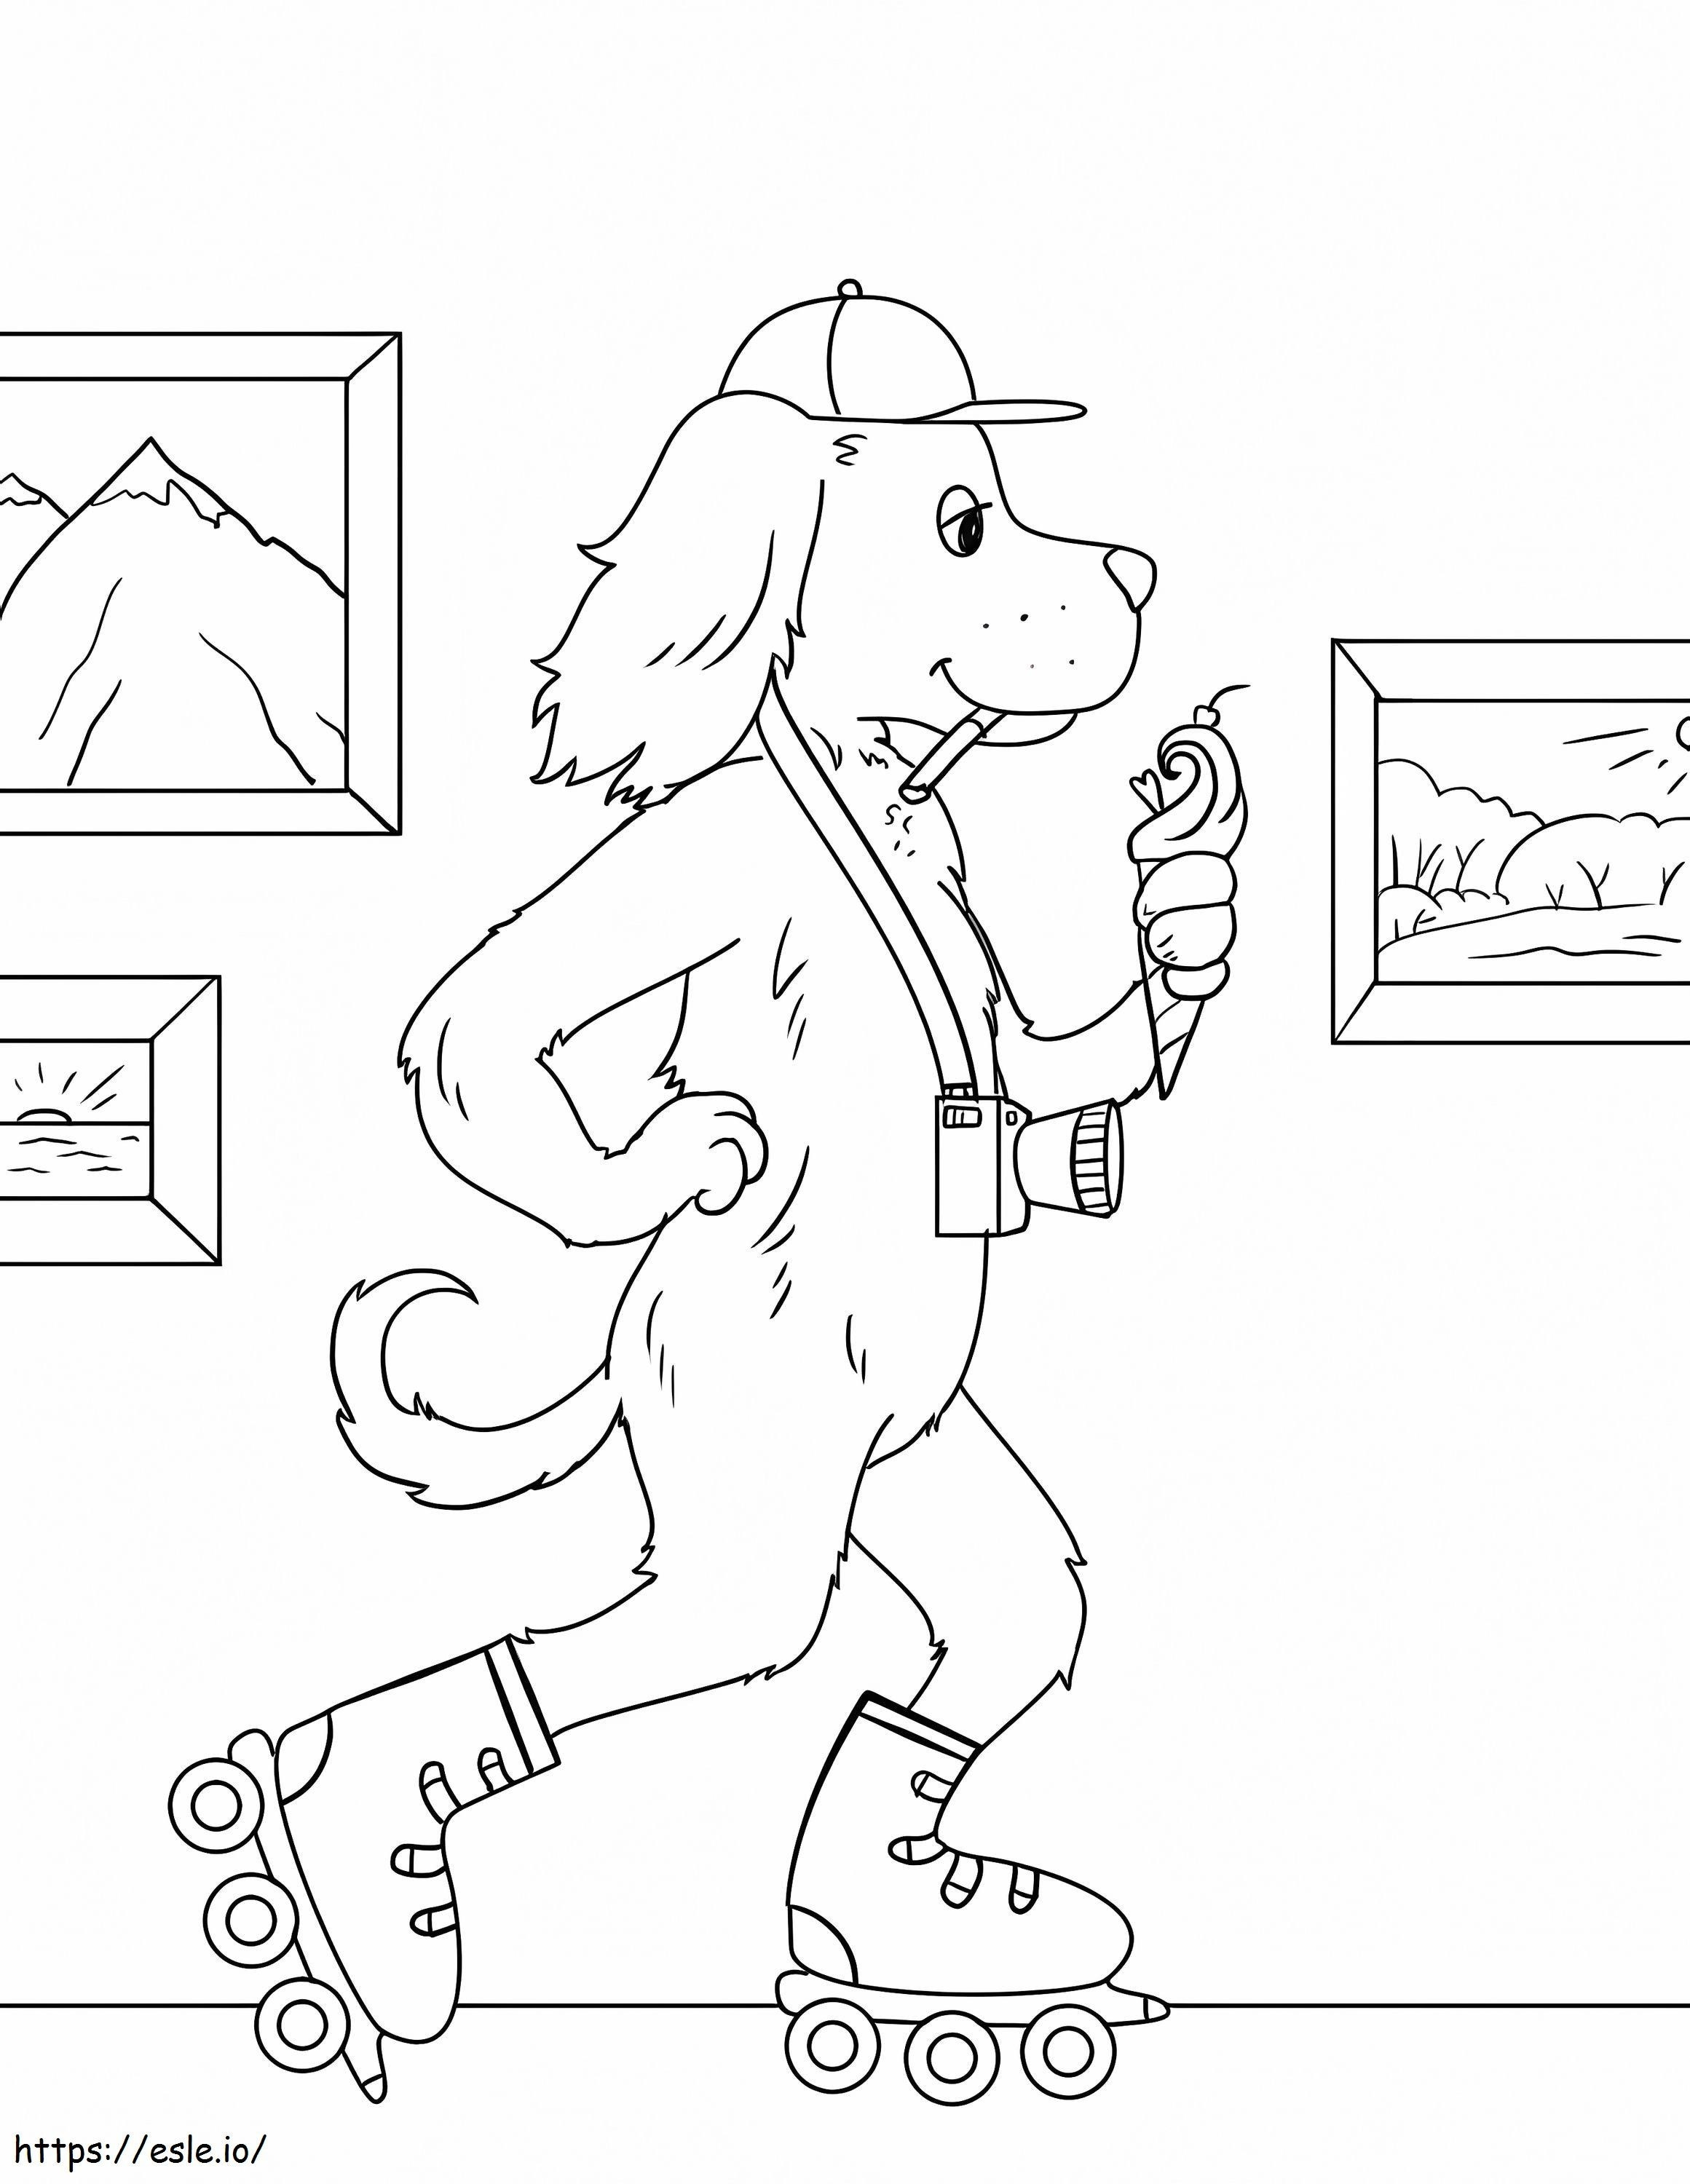 Dog On Rollerblades In A Museum coloring page